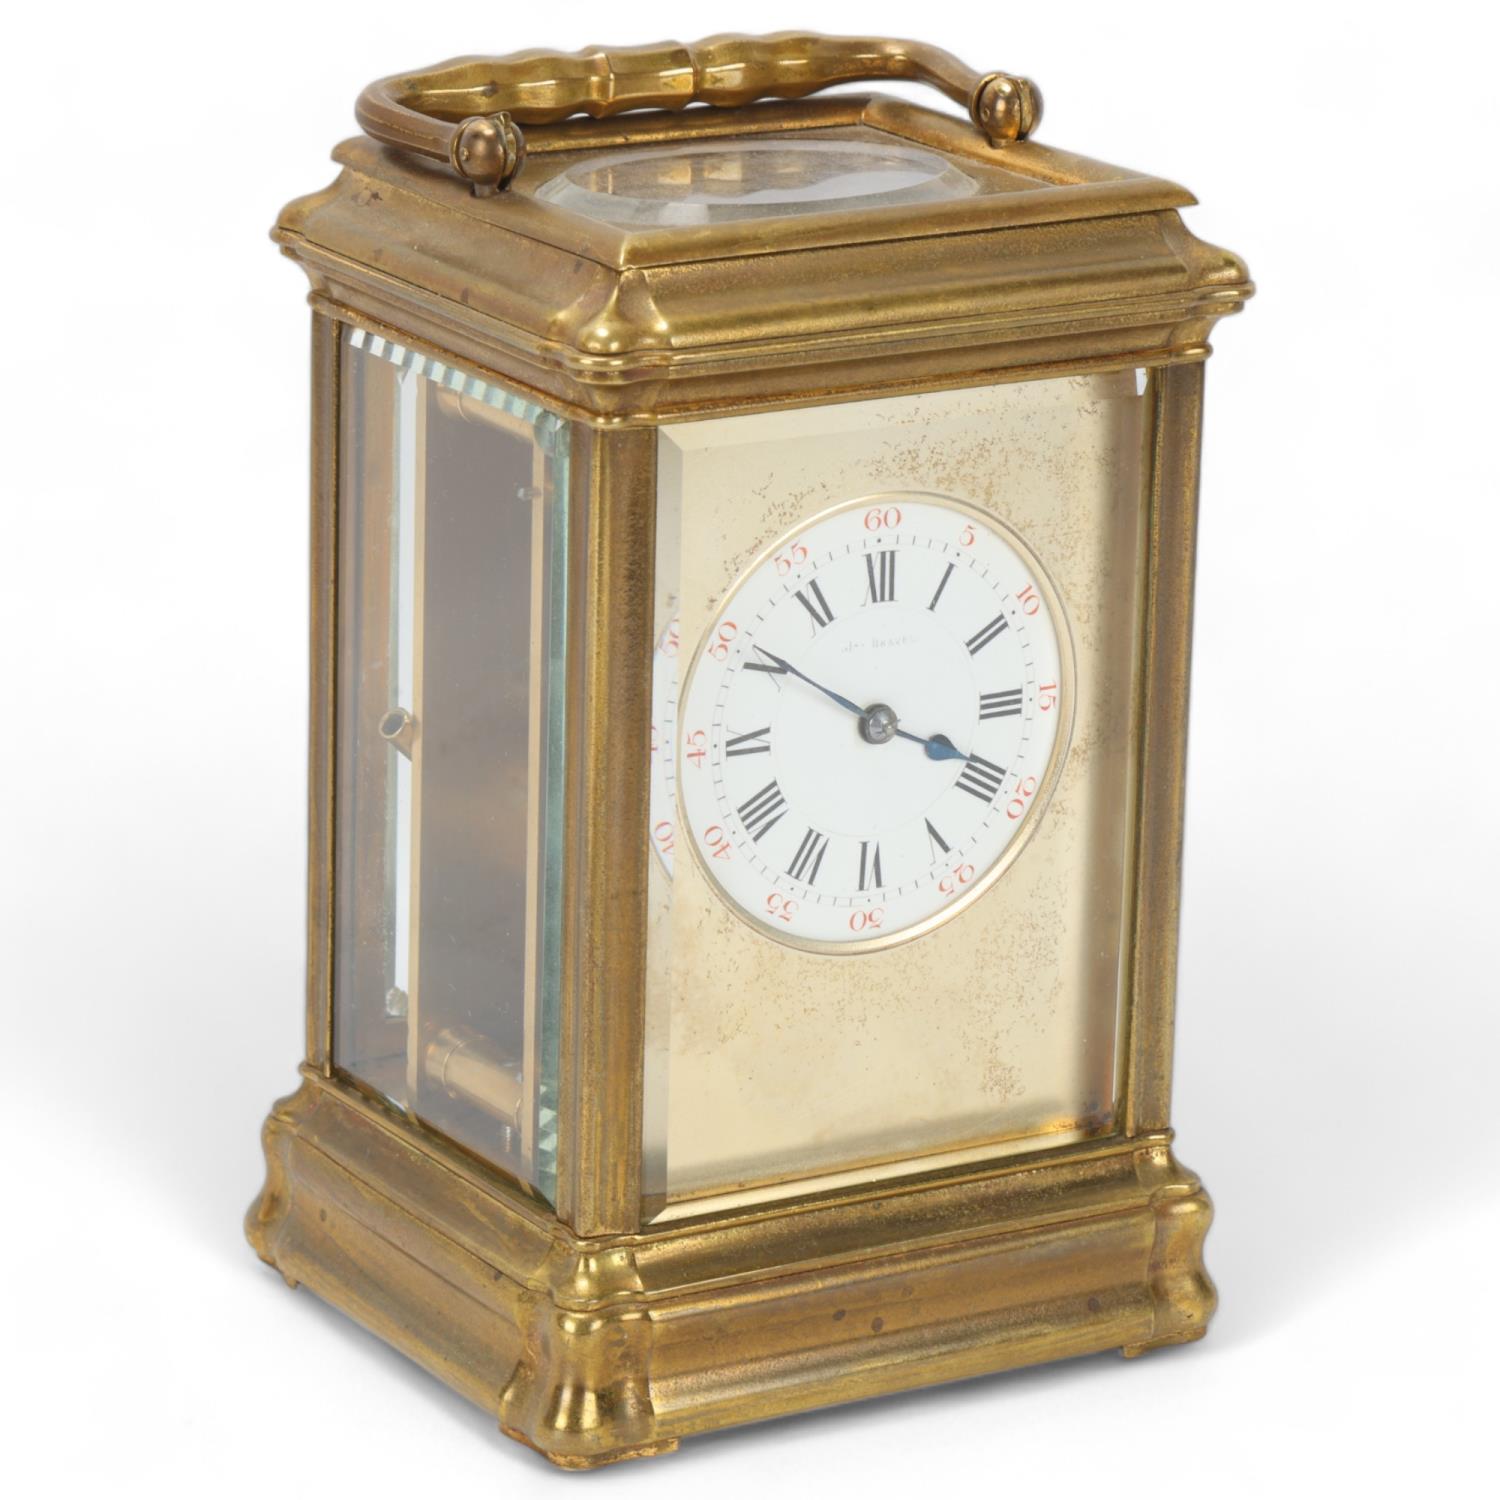 French brass-cased carriage clock, by James Beaven, case height 15cm Brass case lightly tarnished,